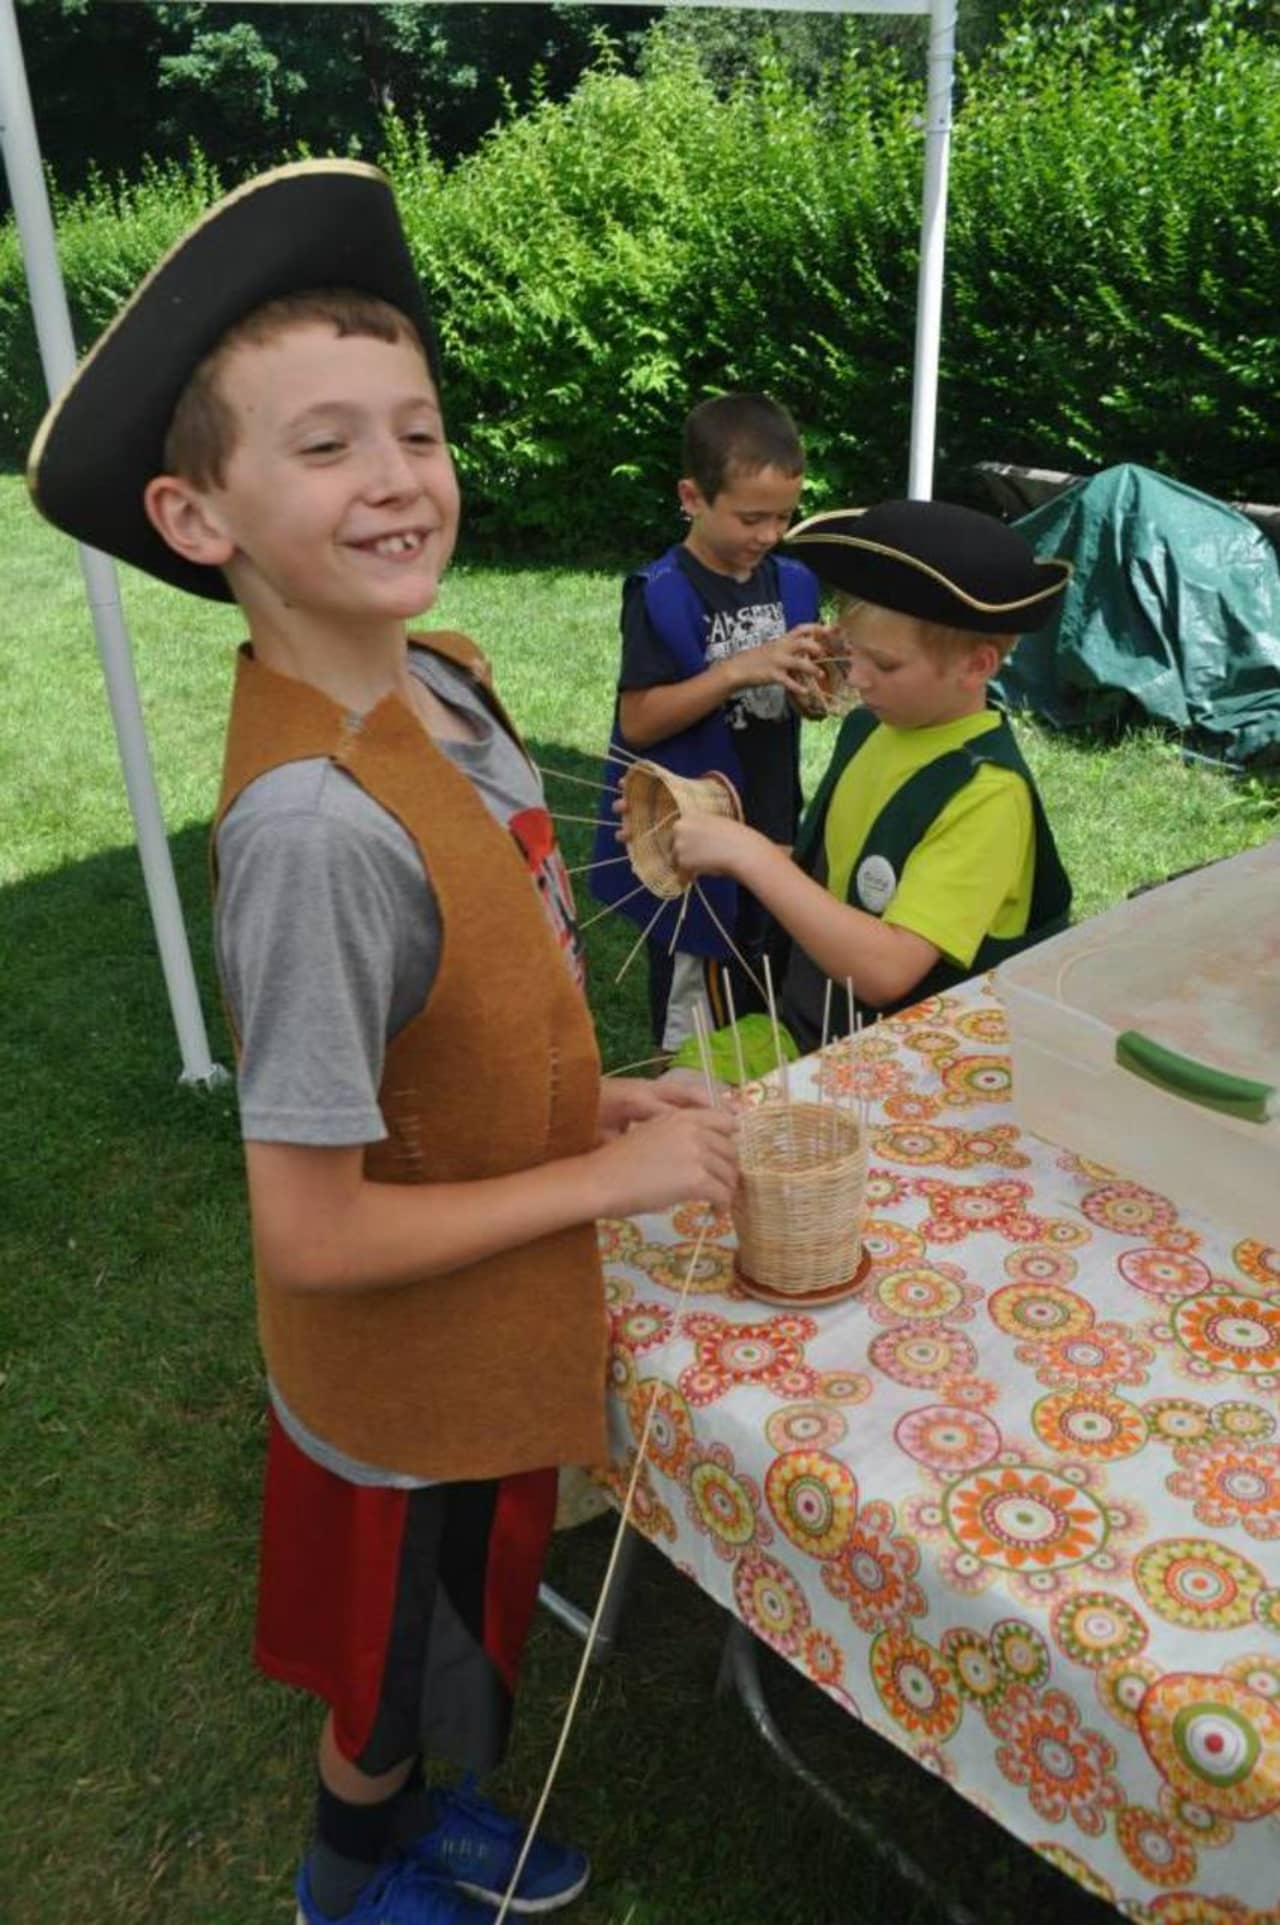 Children participating in a program at The Newtown Historical Society. The Newtown Historical Society is sponsoring an open house on May 15, from noon-4.